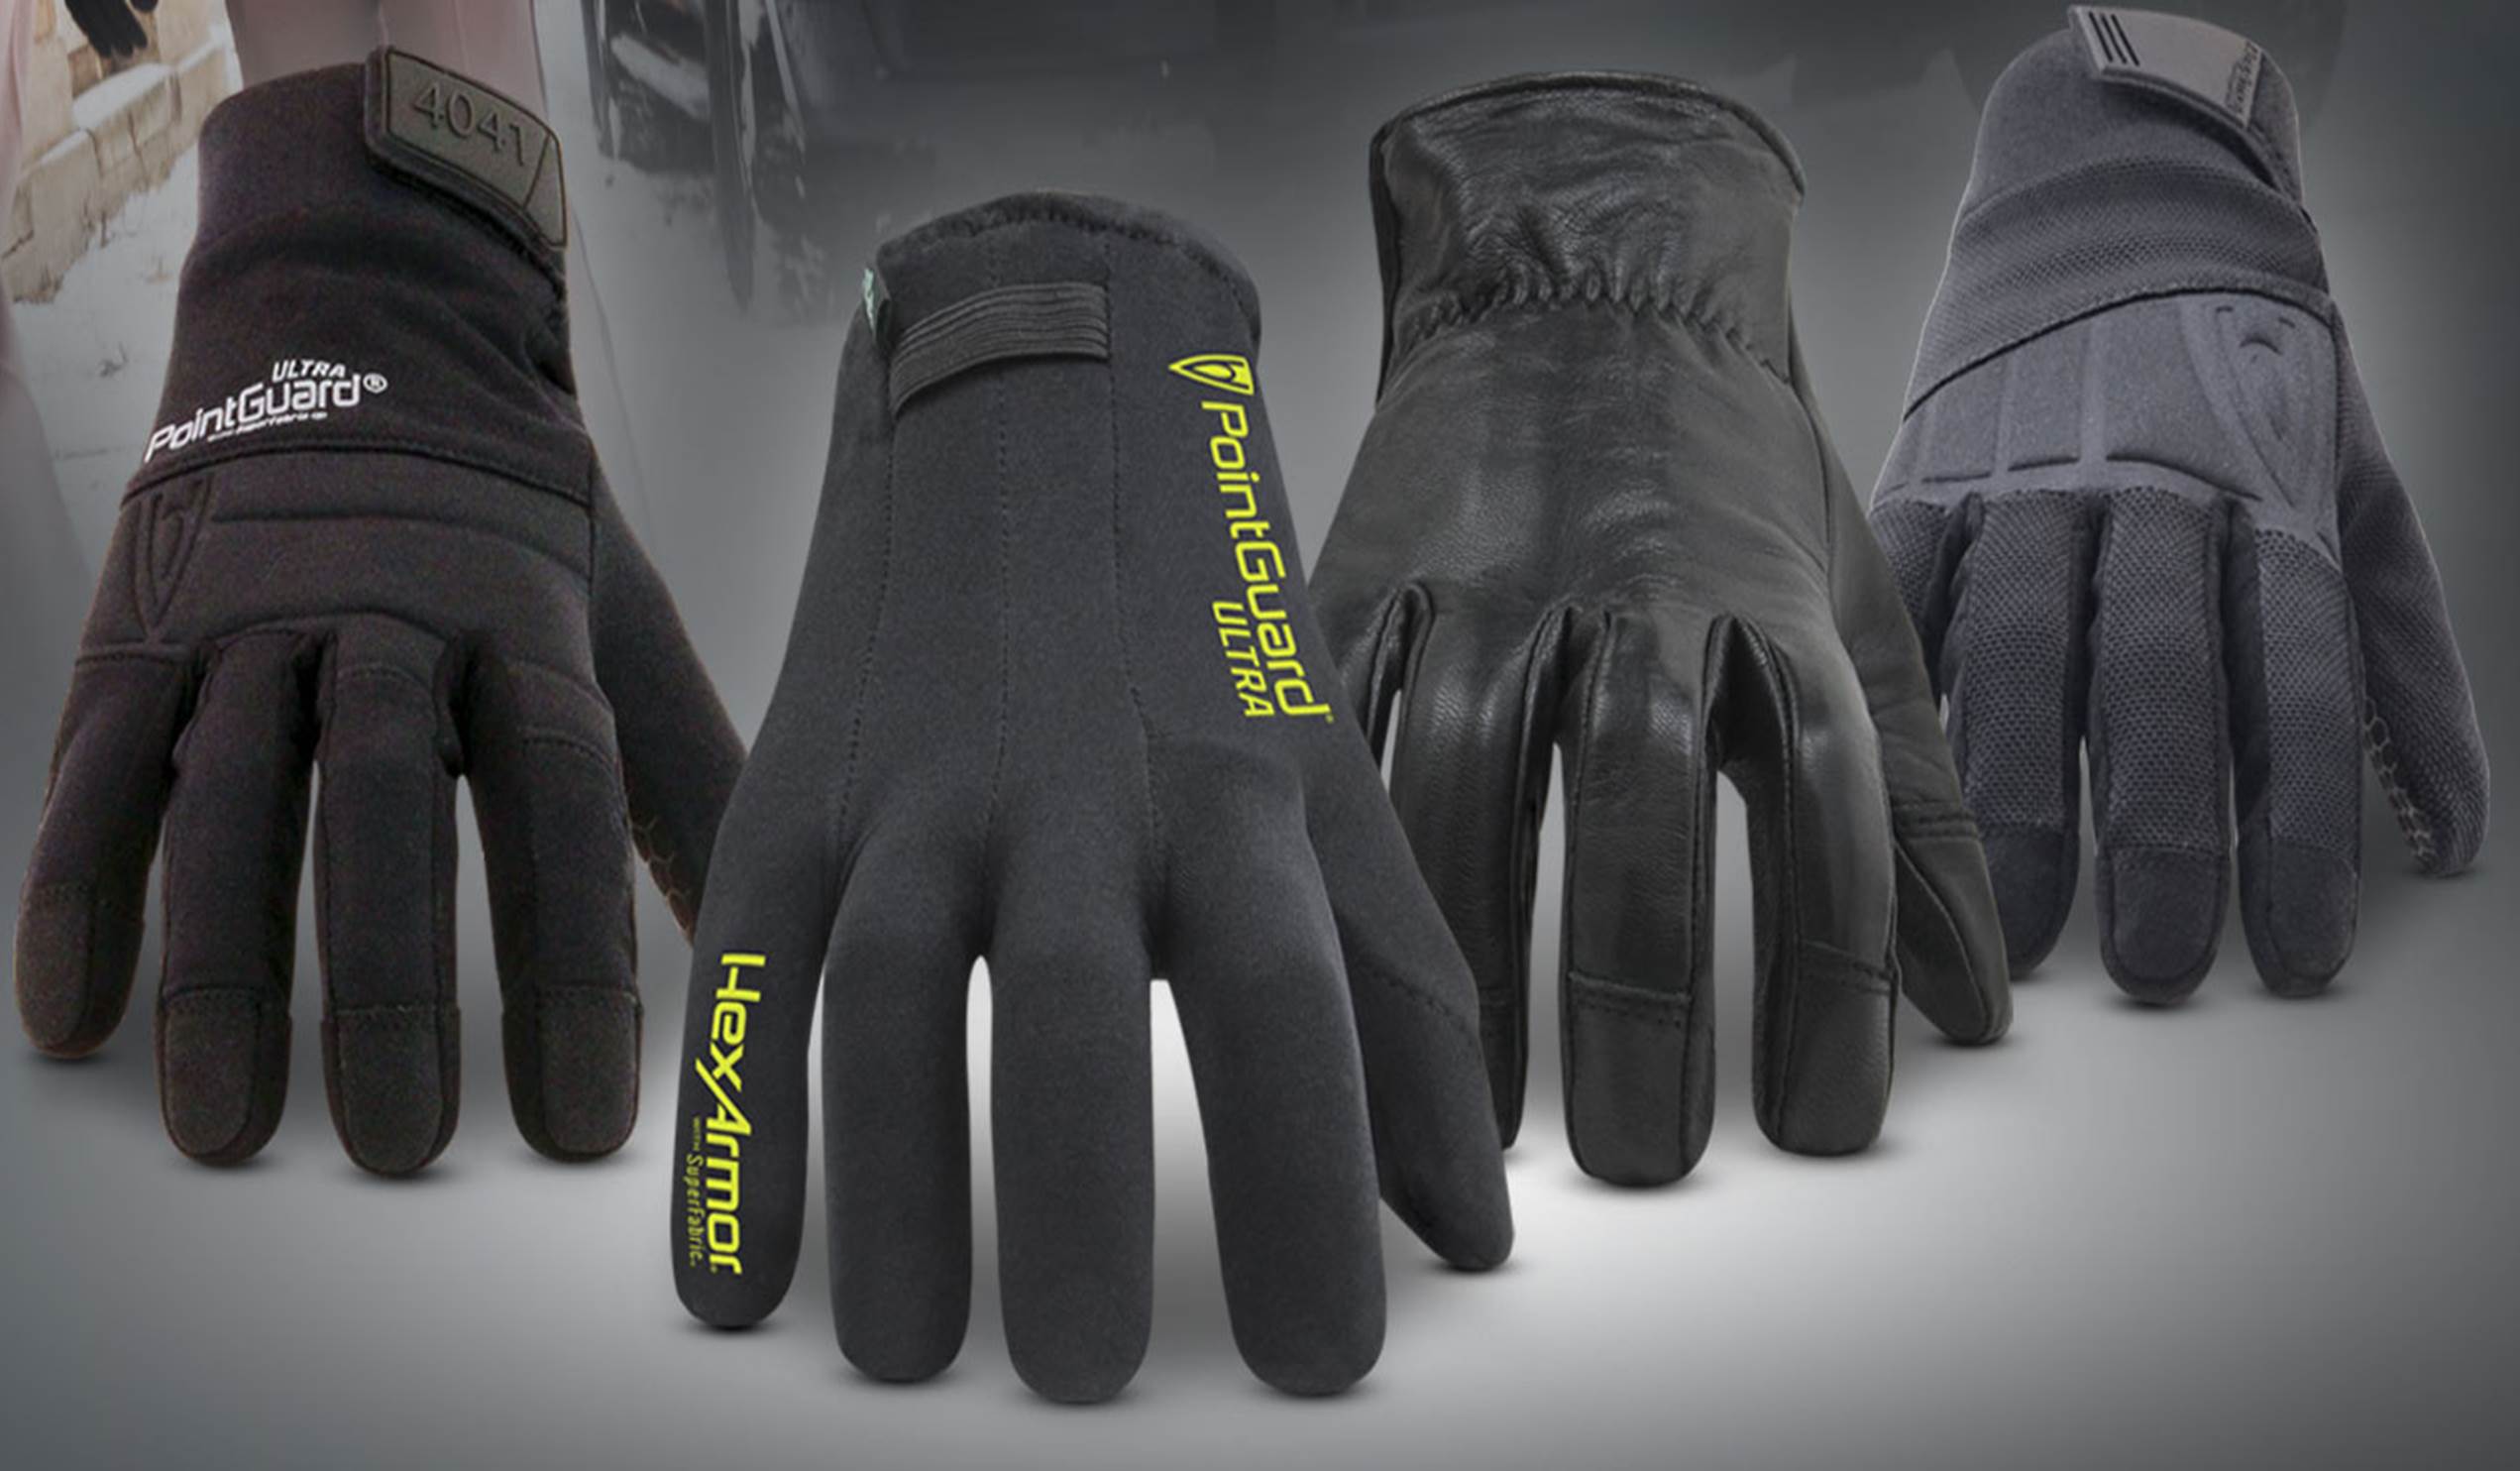 PointGuard® Ultra Needlestick Resistant Hand Protection